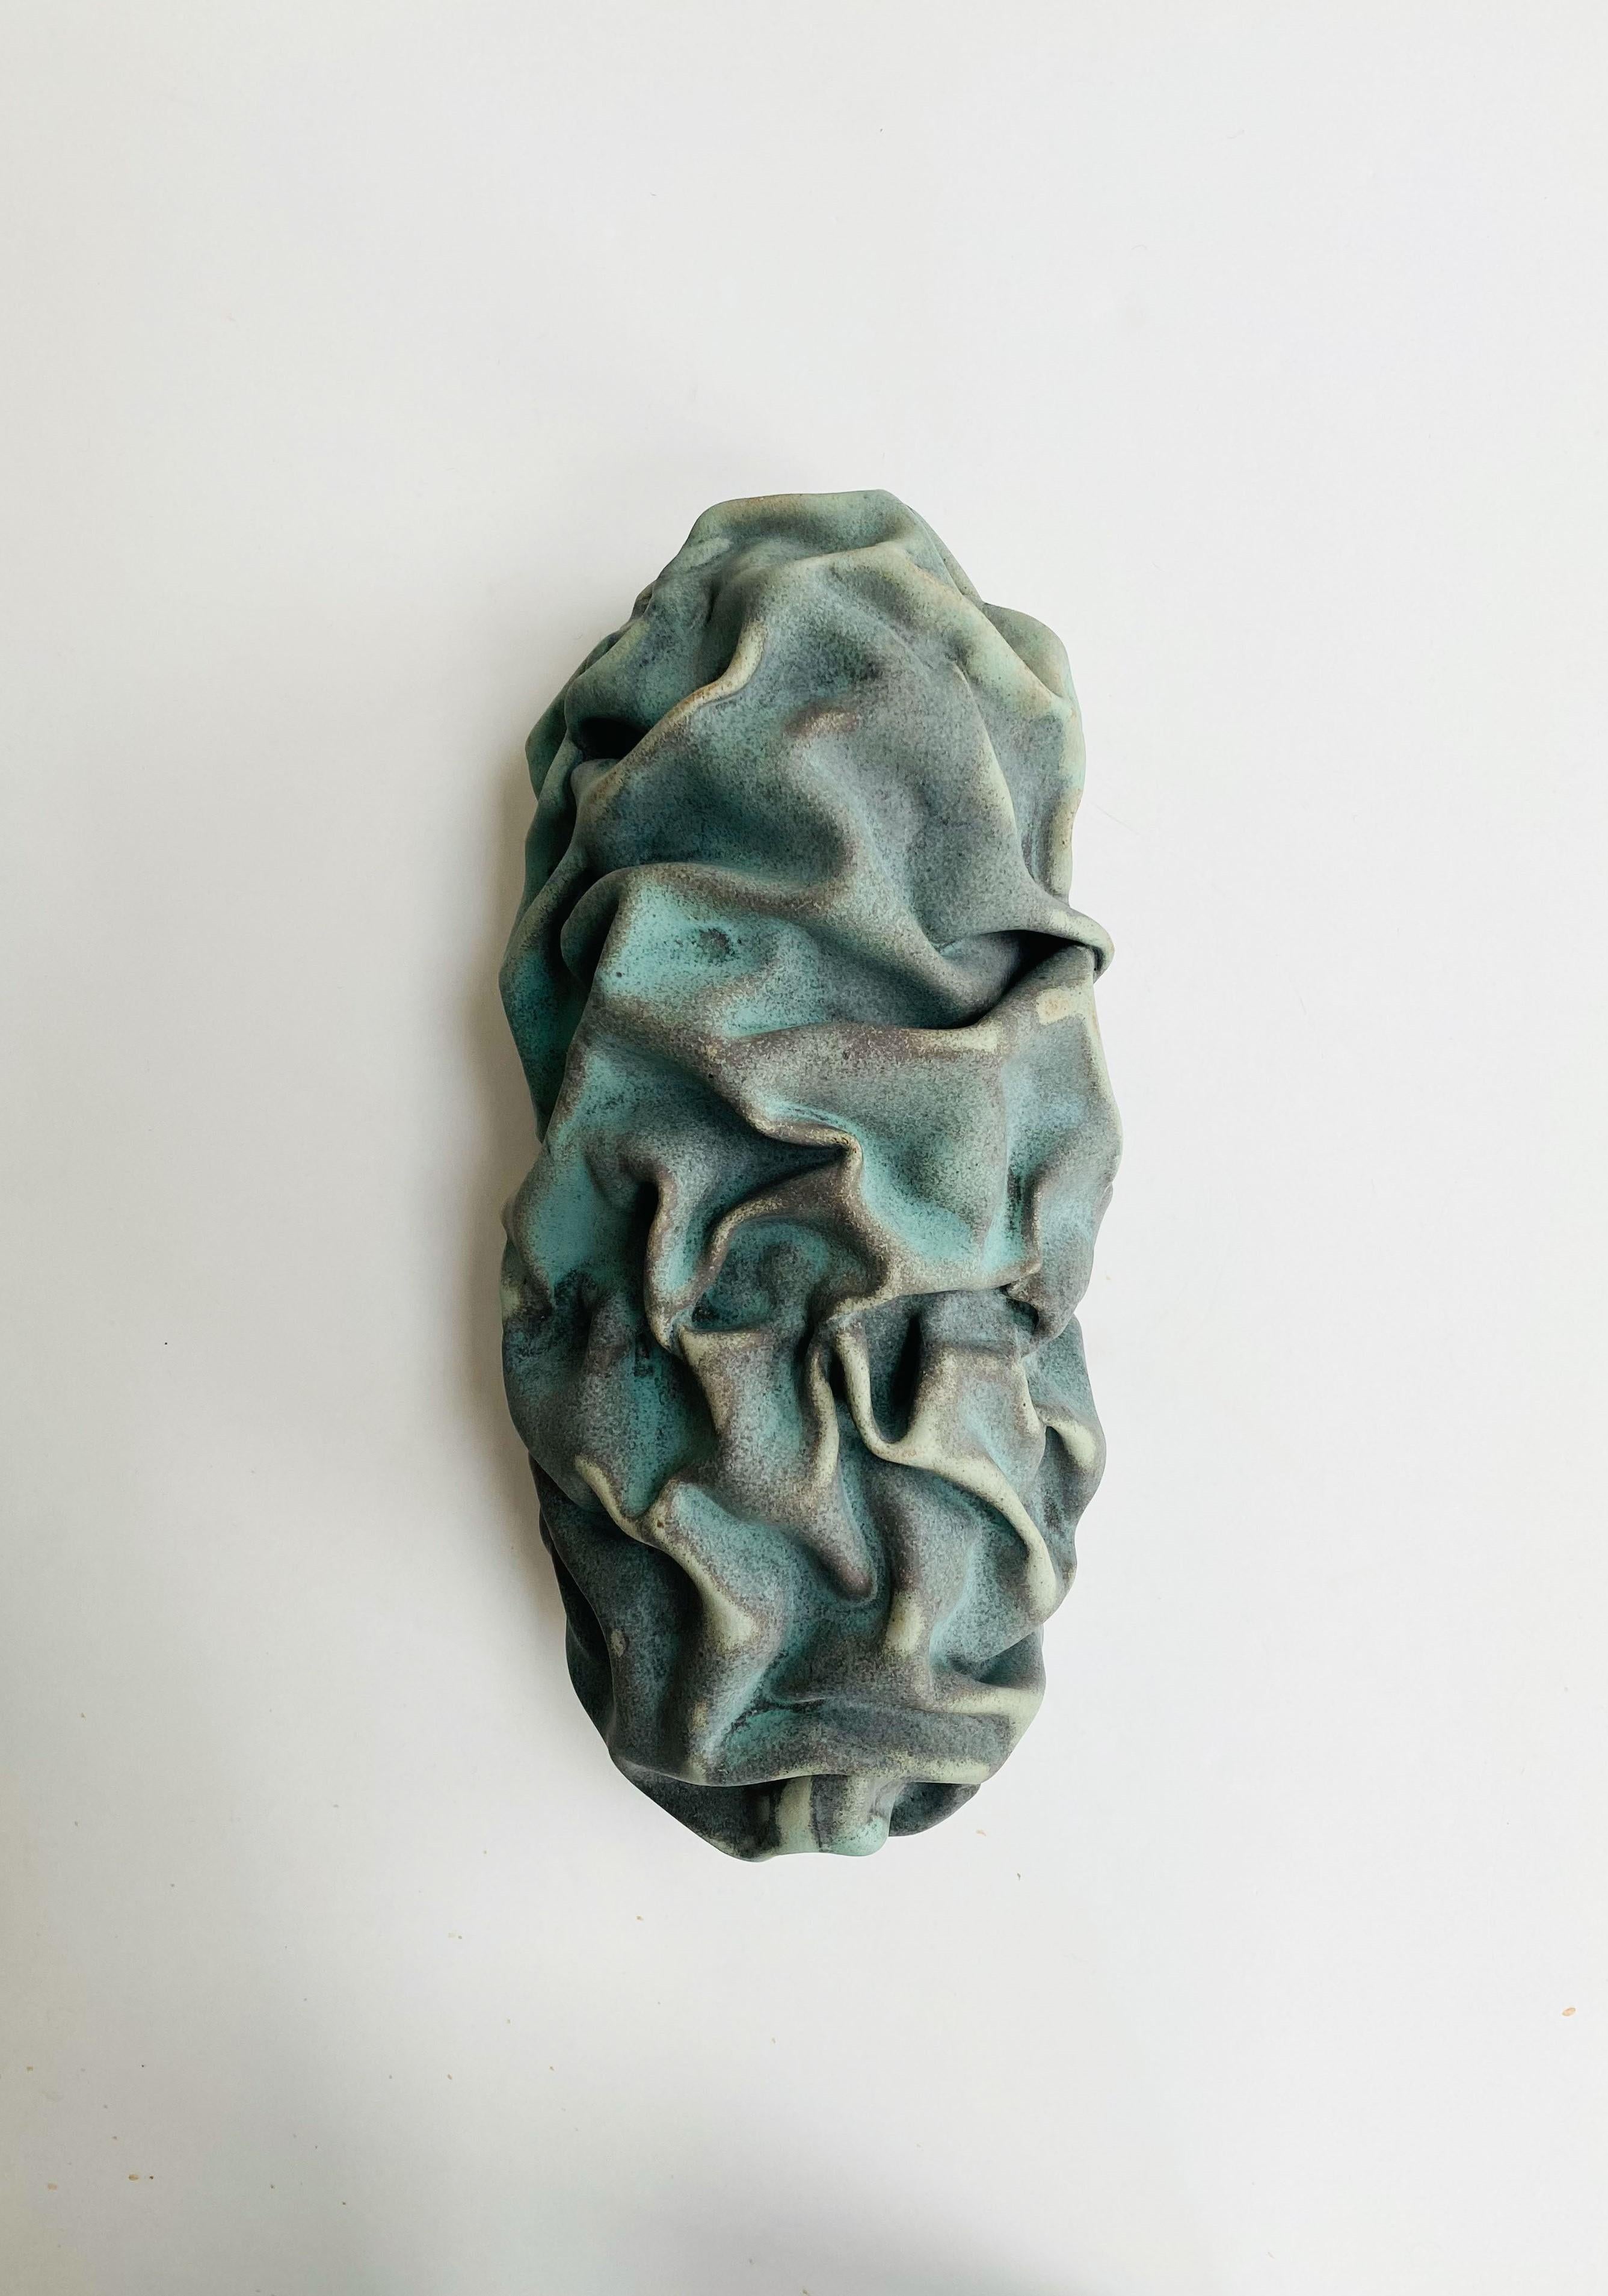 Emboss wall sculpture III by Sophie Rogers.
Dimensions: D 9 x W 15 x H 31 cm.
Materials: Ceramic, glaze.
Other glaze colors available.

Wall sculpture with undulating shape like a draped piece of cloth. Changes expression depending on the light